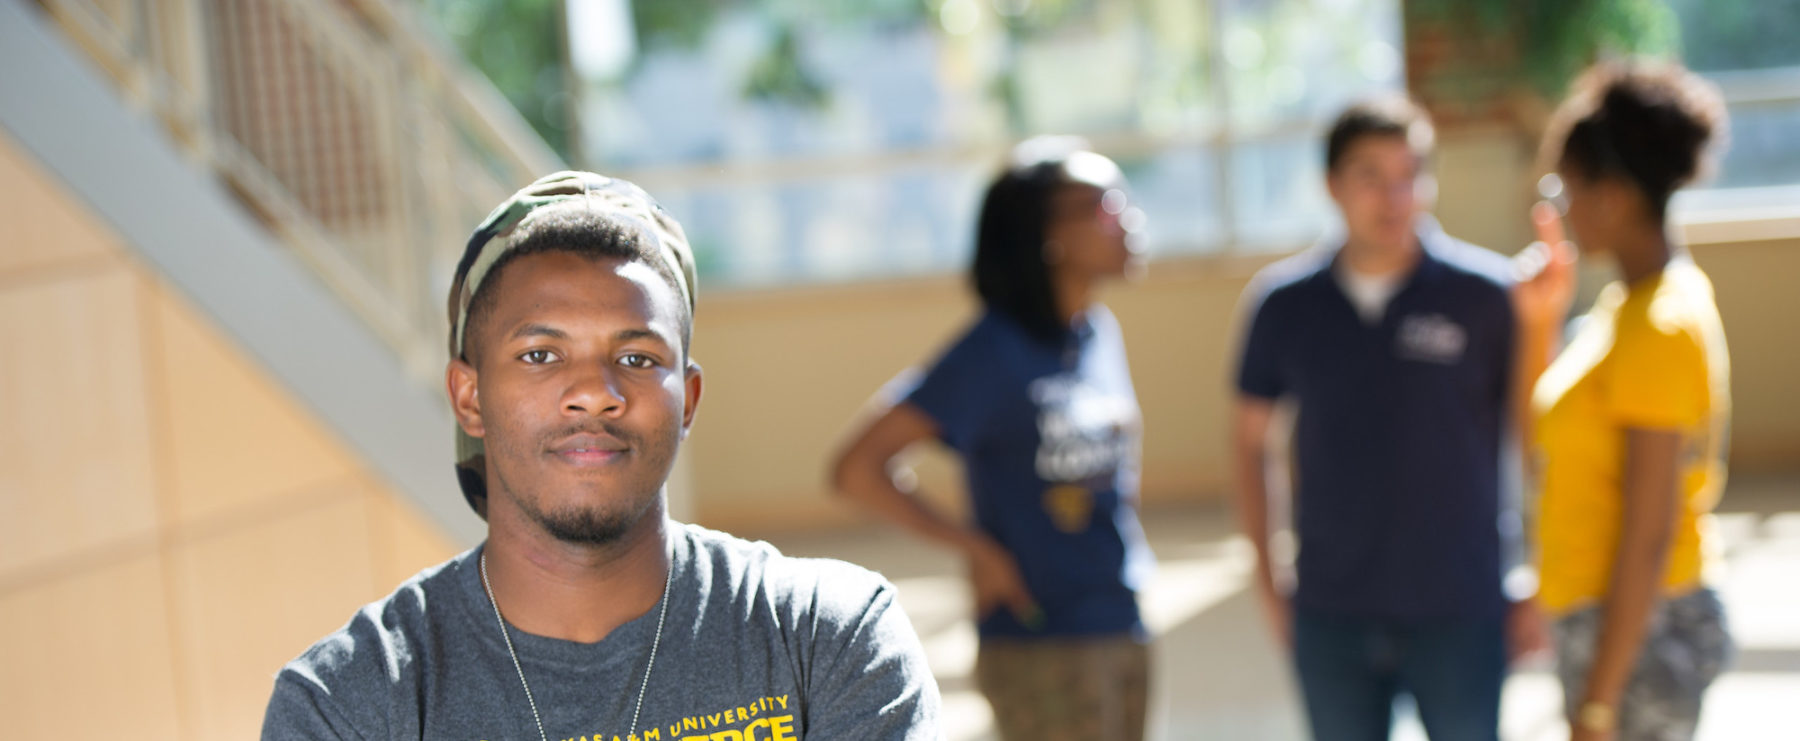 A&M-Commerce Students Receive Financial Relief Through CARES Act